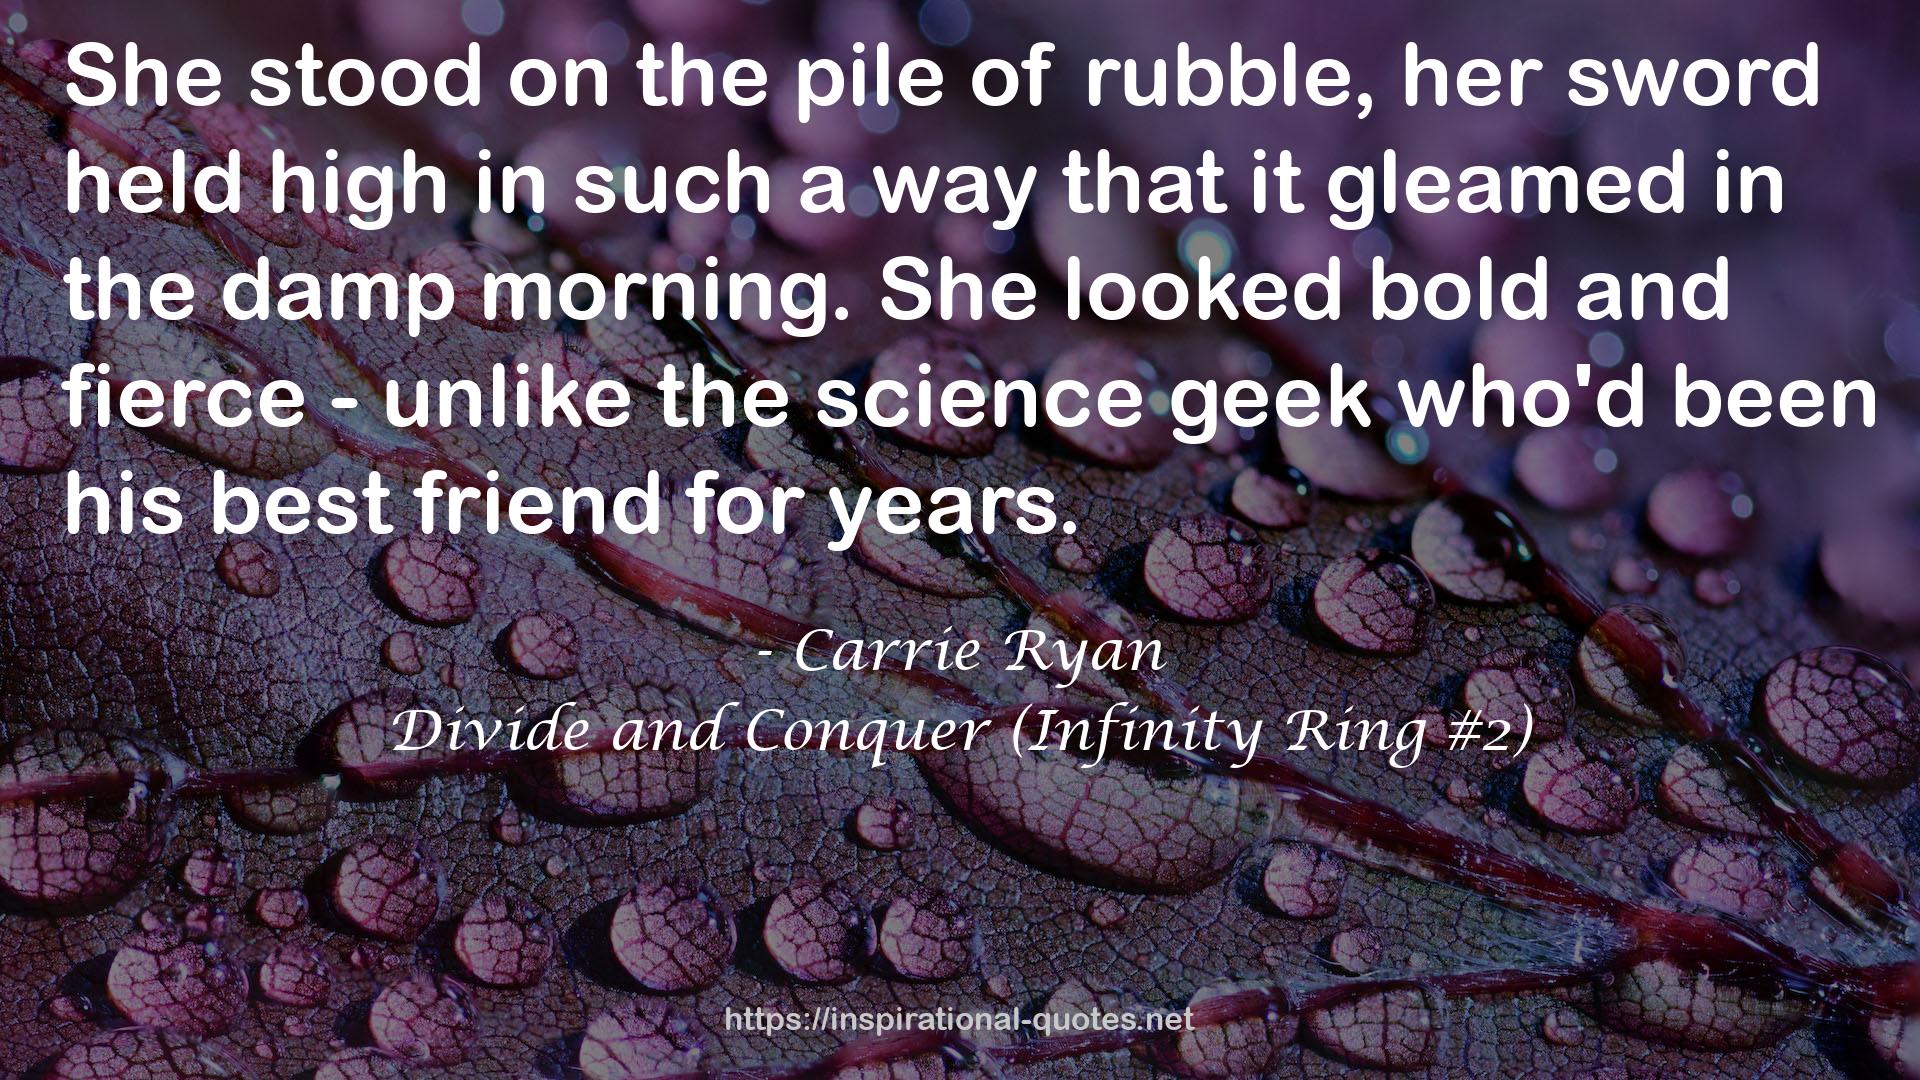 Divide and Conquer (Infinity Ring #2) QUOTES